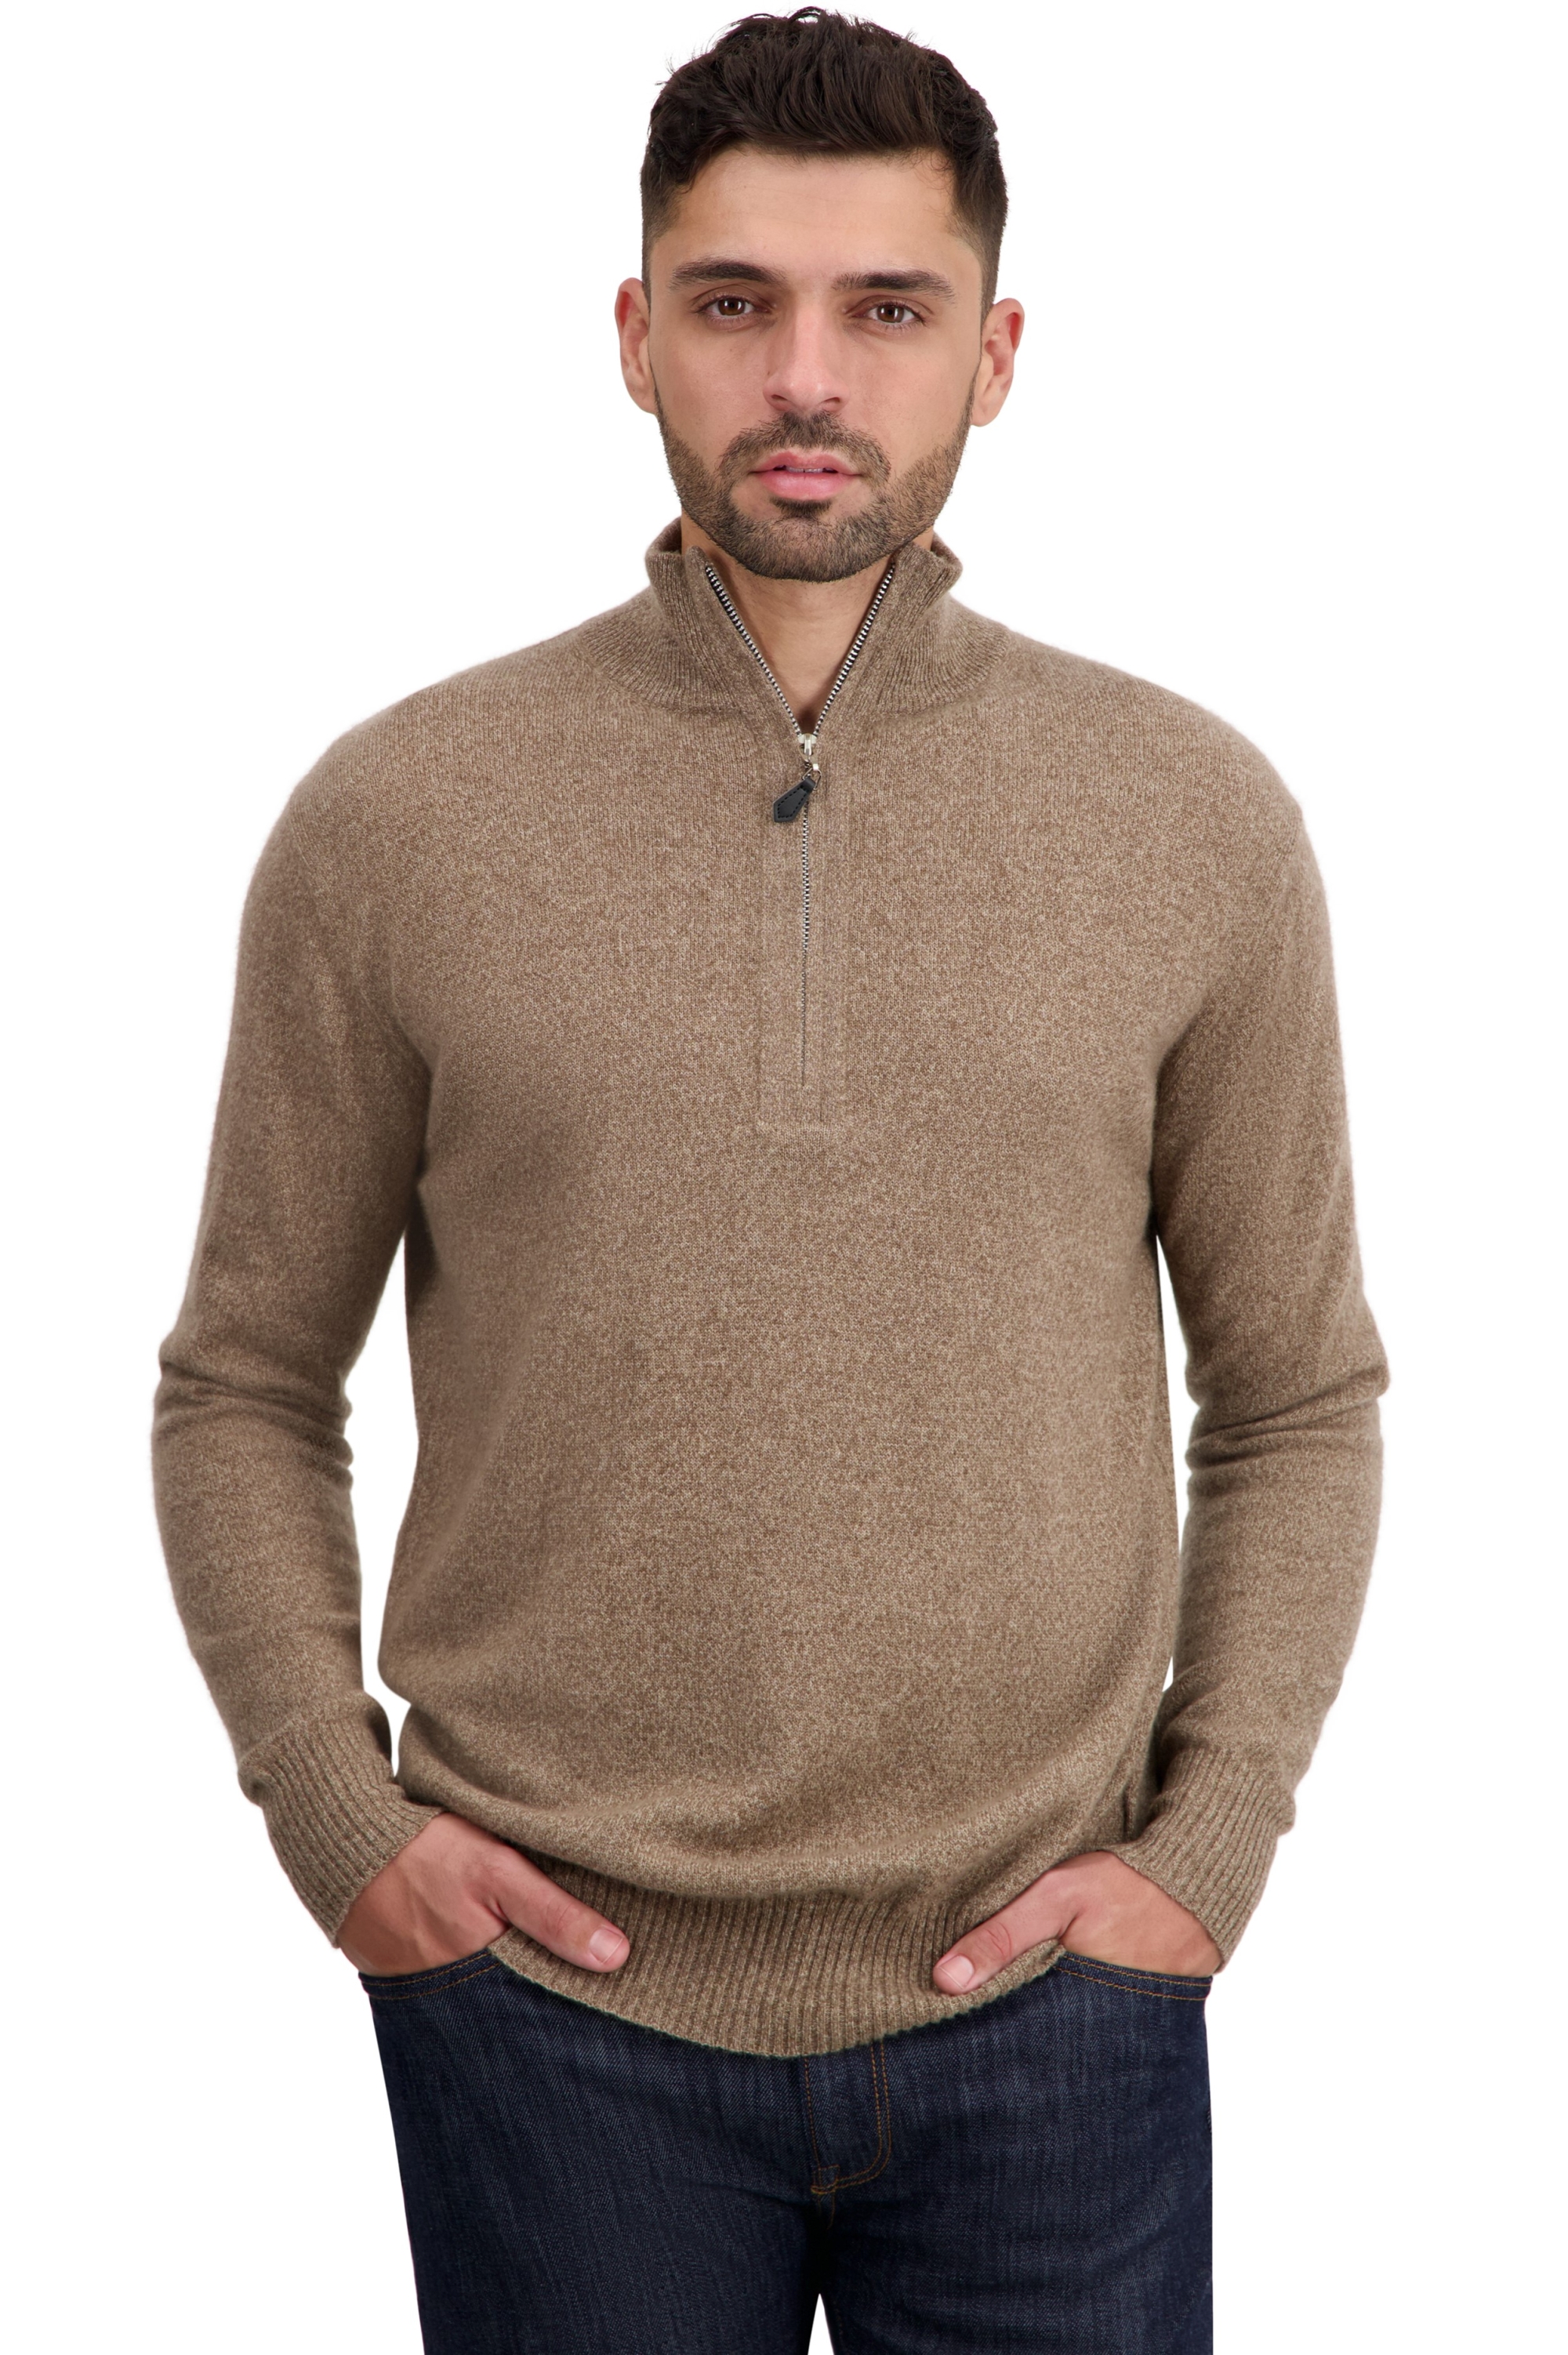 Cachemire pull homme toulon first tan marl l